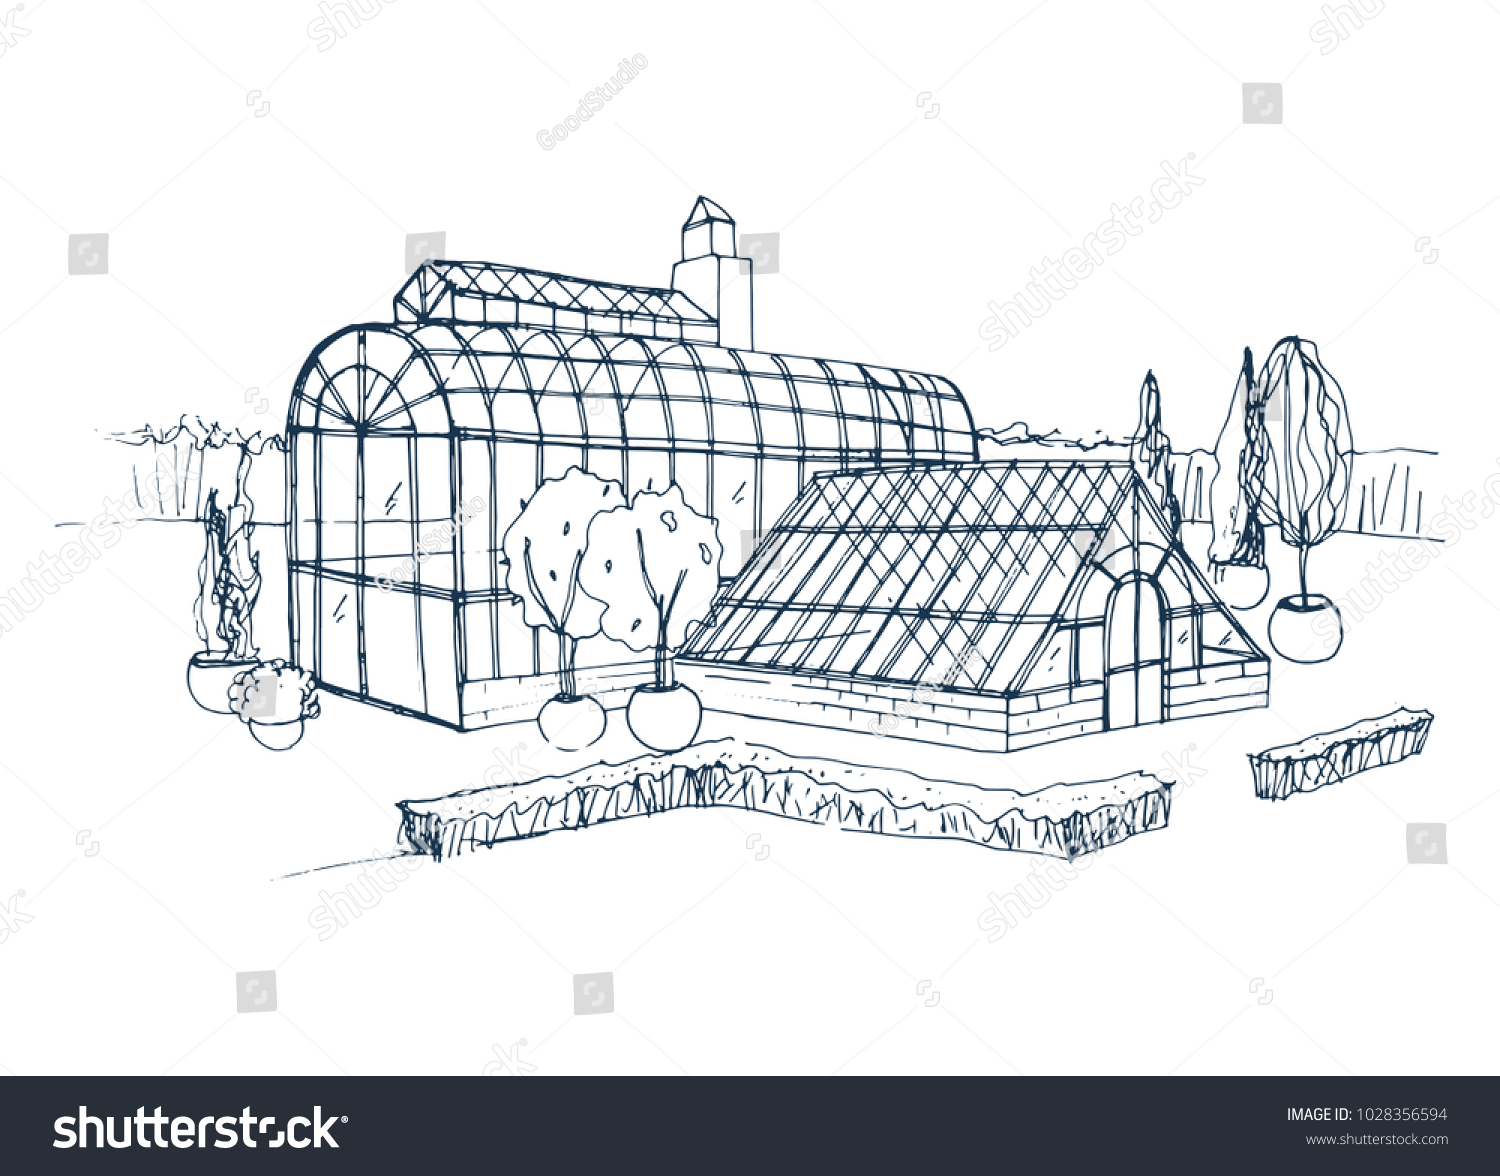 SVG of Freehand sketch of exterior of exotic botanical garden surrounded by bushes and trees growing in pots. Rough drawing of facade of glass greenhouse. Monochrome hand drawn vector illustration.  svg